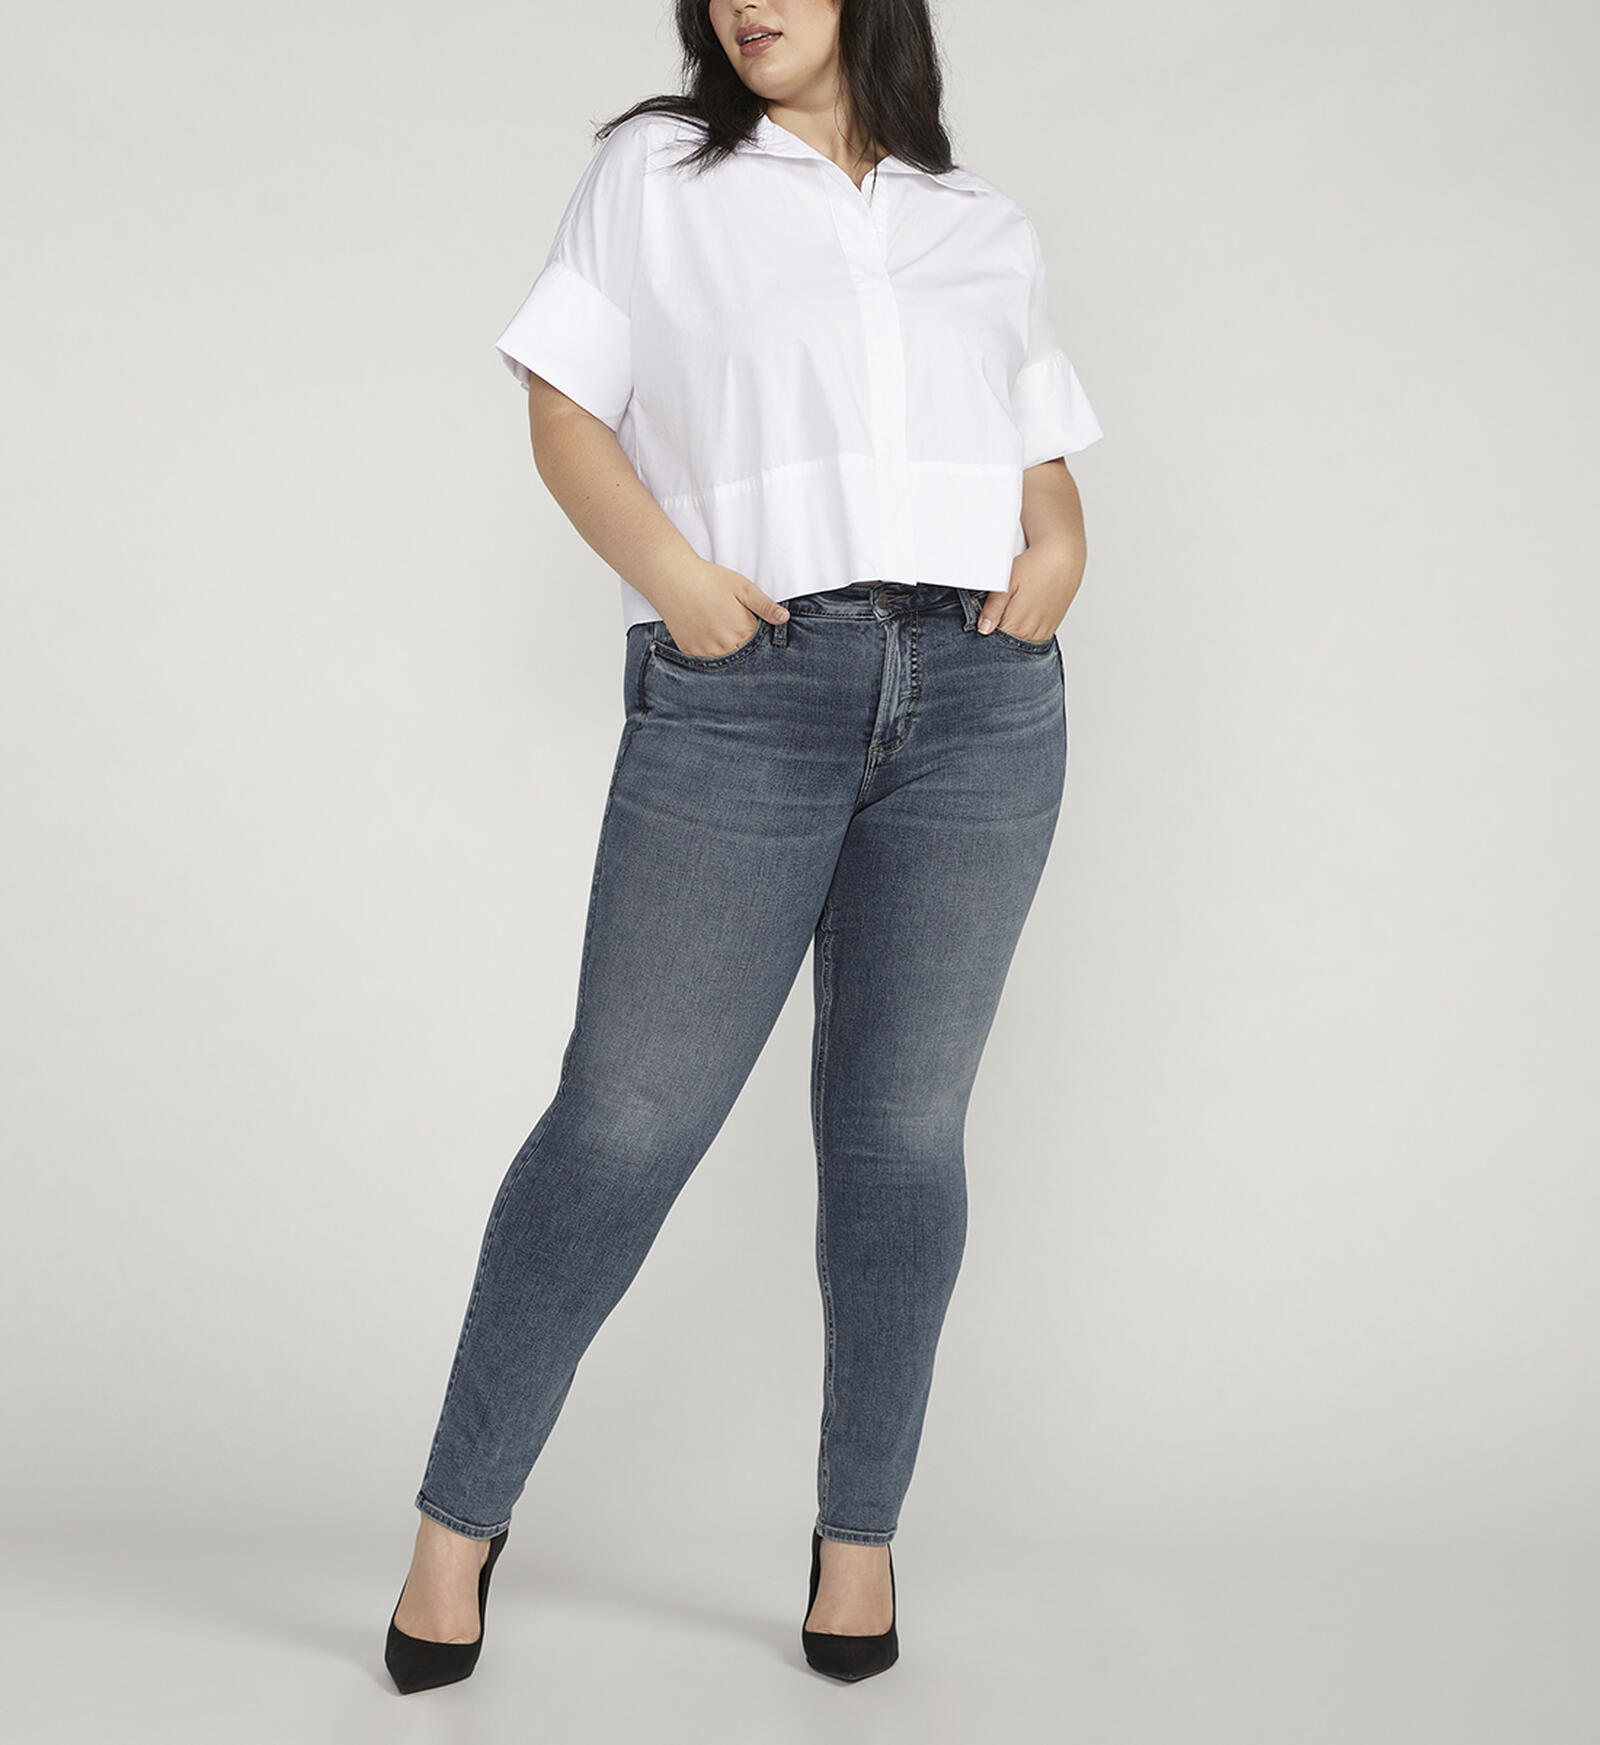 Buy Most Wanted Mid Rise Straight Leg Jeans Plus Size for USD 54.00